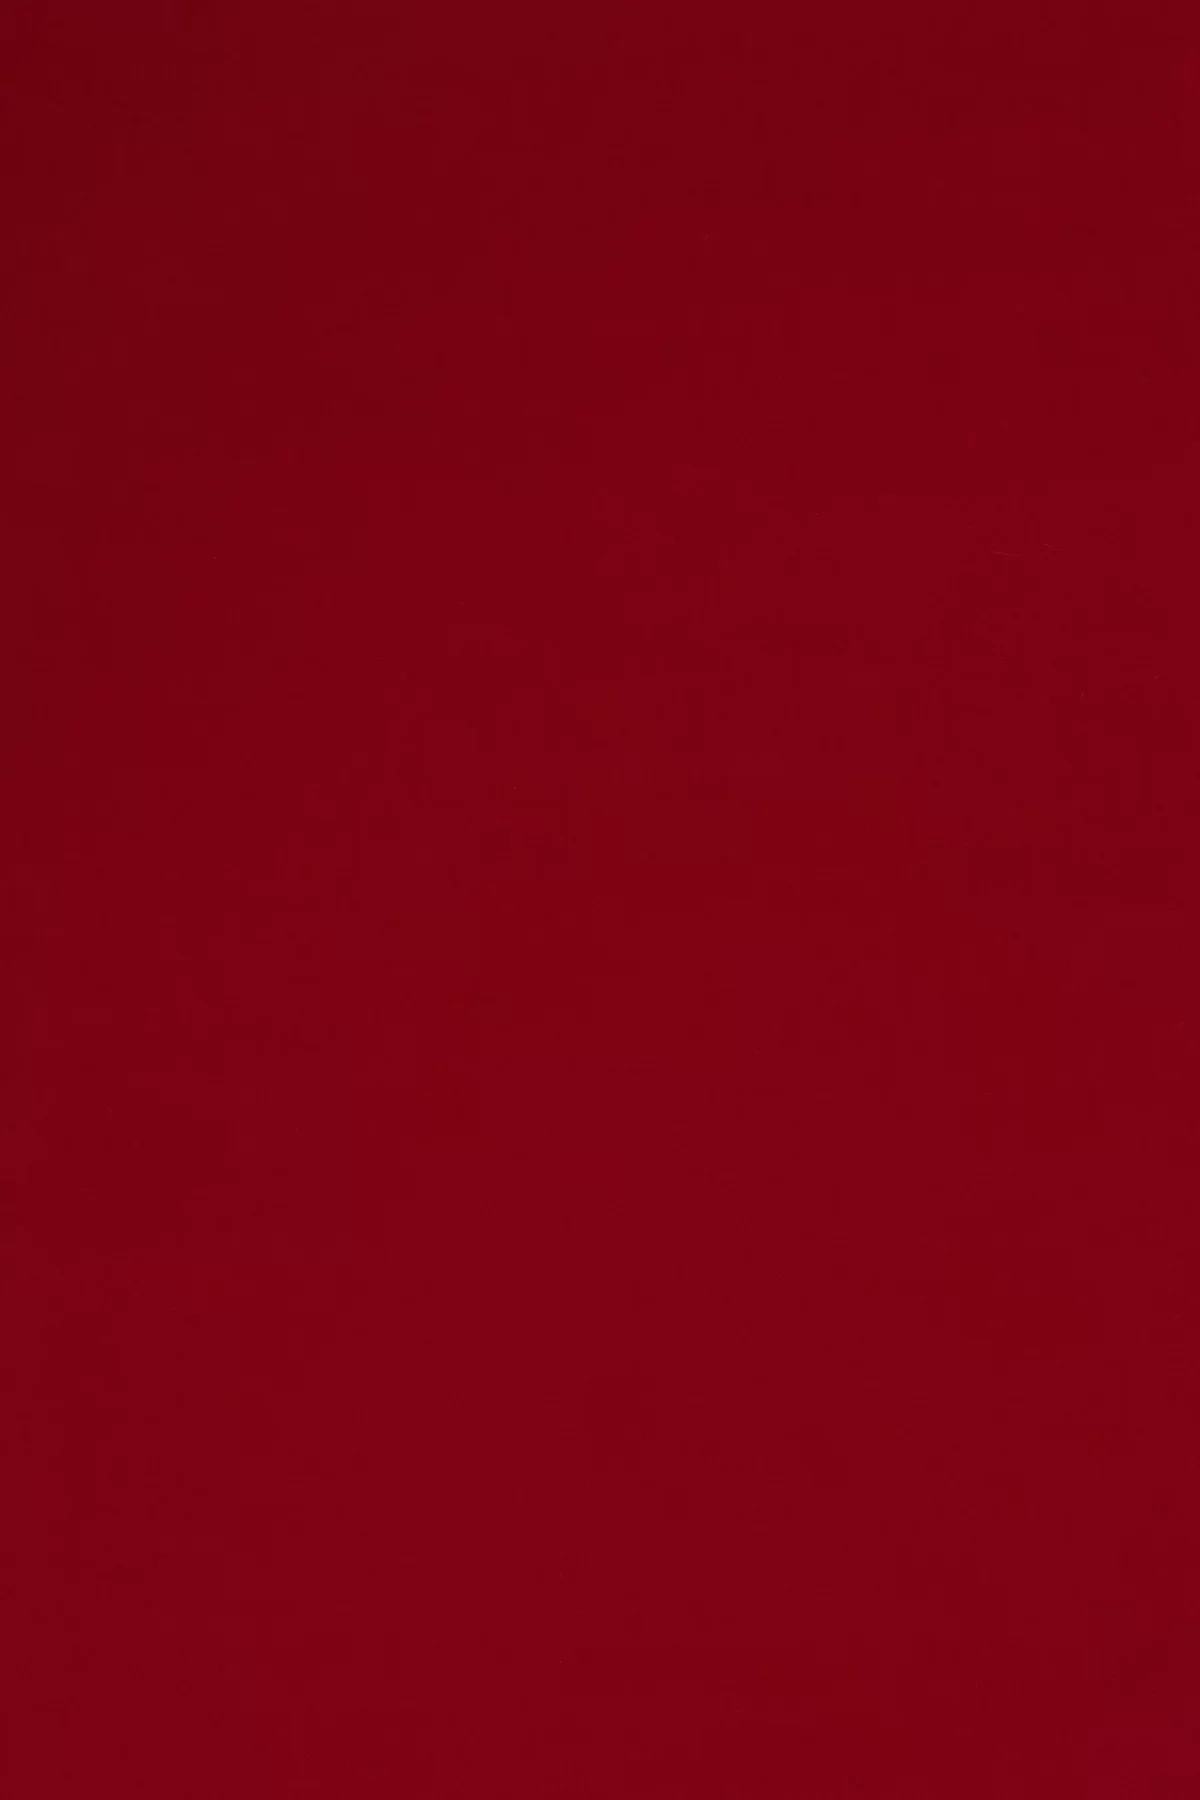 Fabric sample Harald 3 552 red